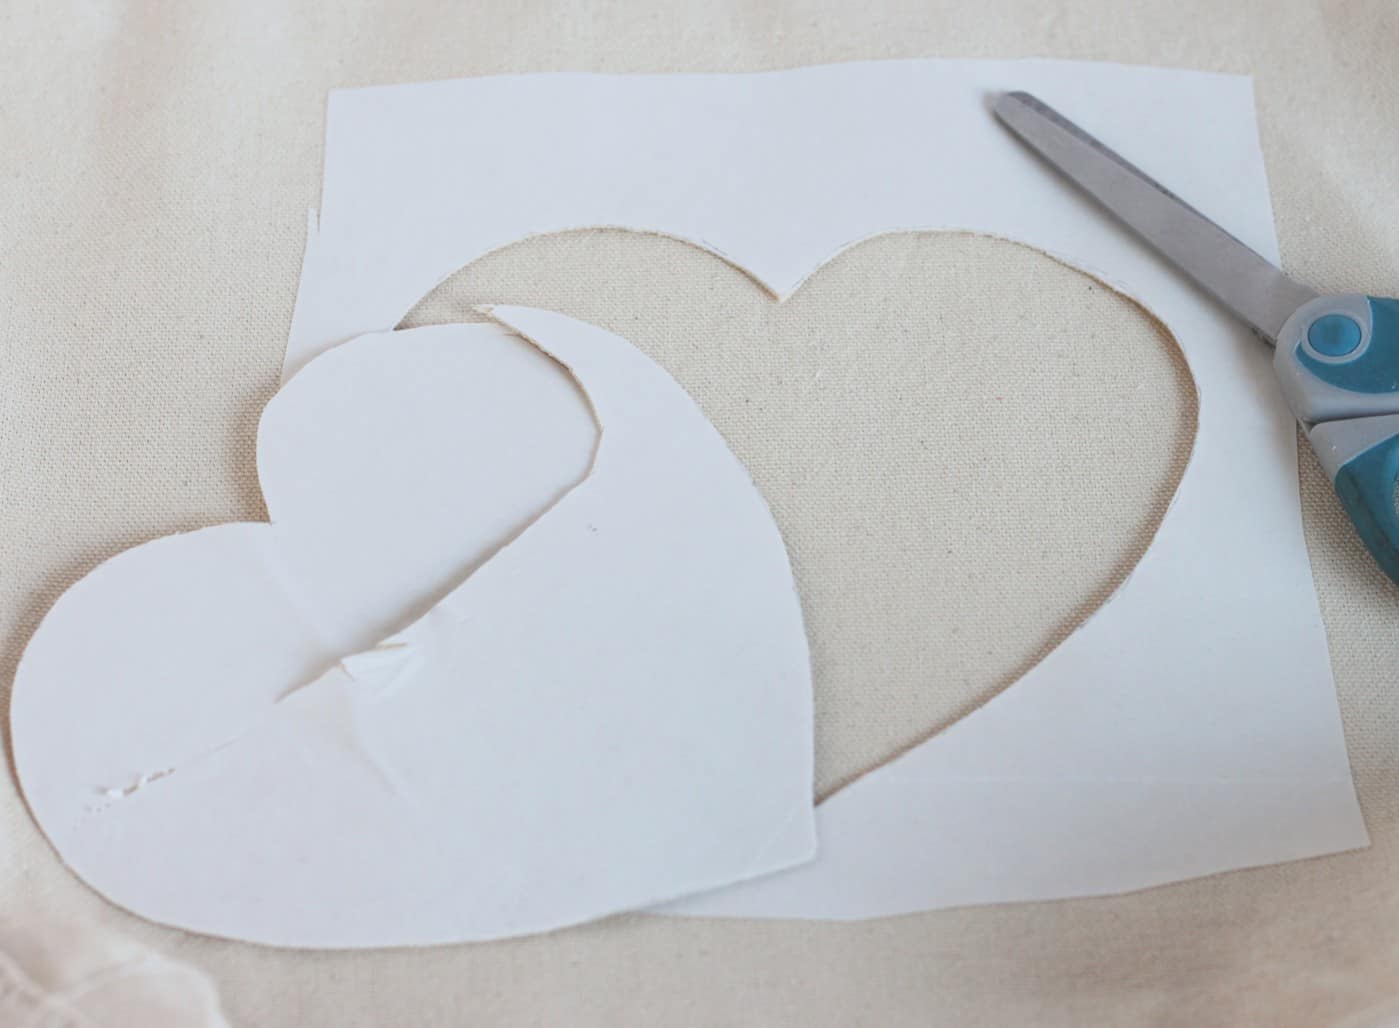 Inside of the heart cut out with the scissors from the tote bag